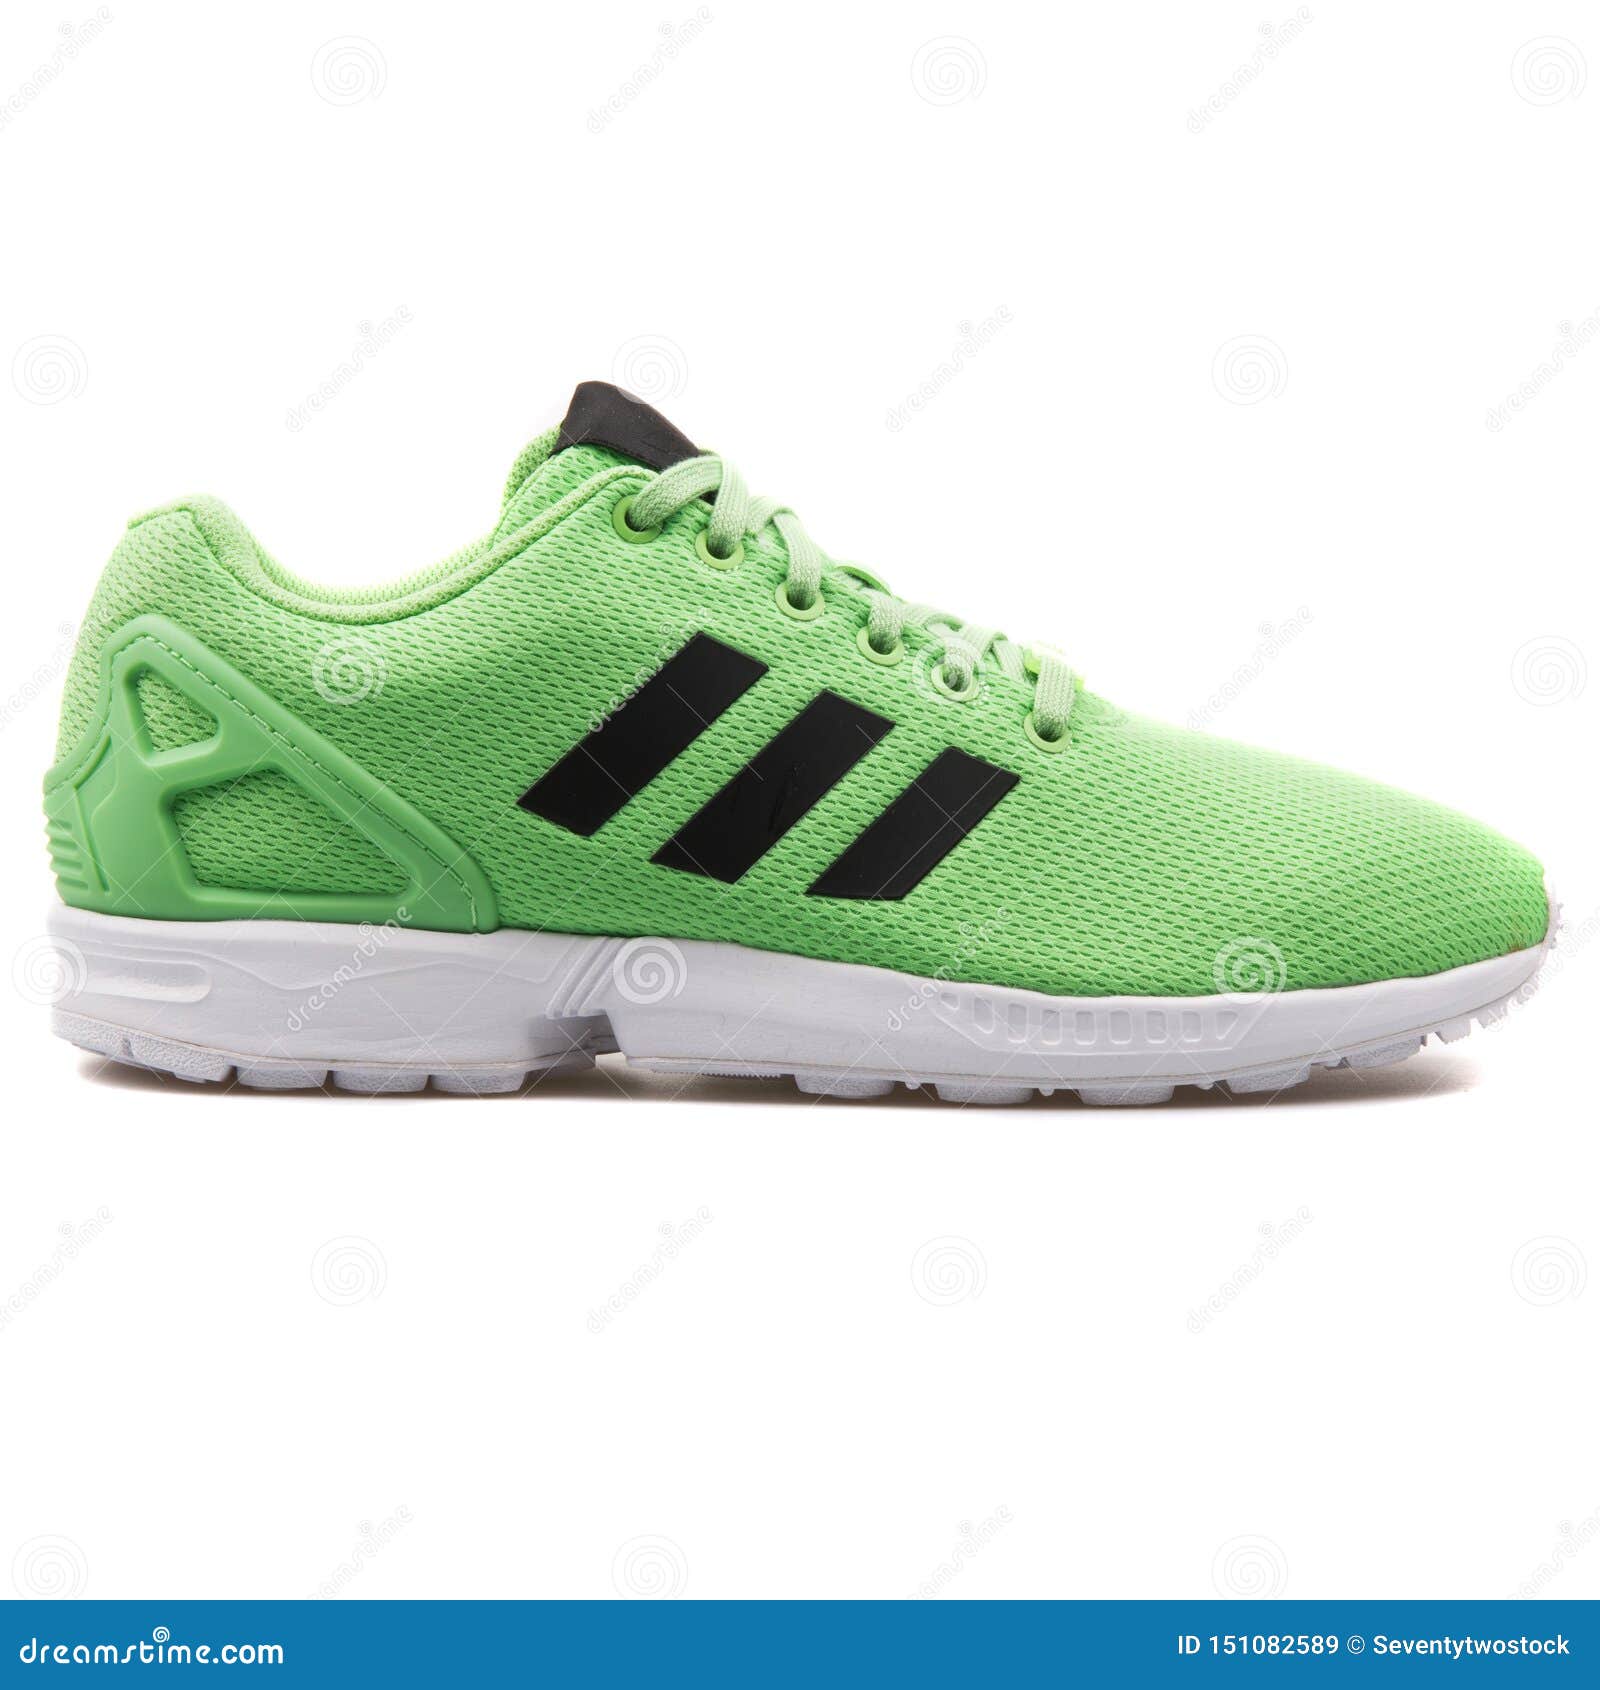 Adidas ZX Flux Green and Black Sneaker 